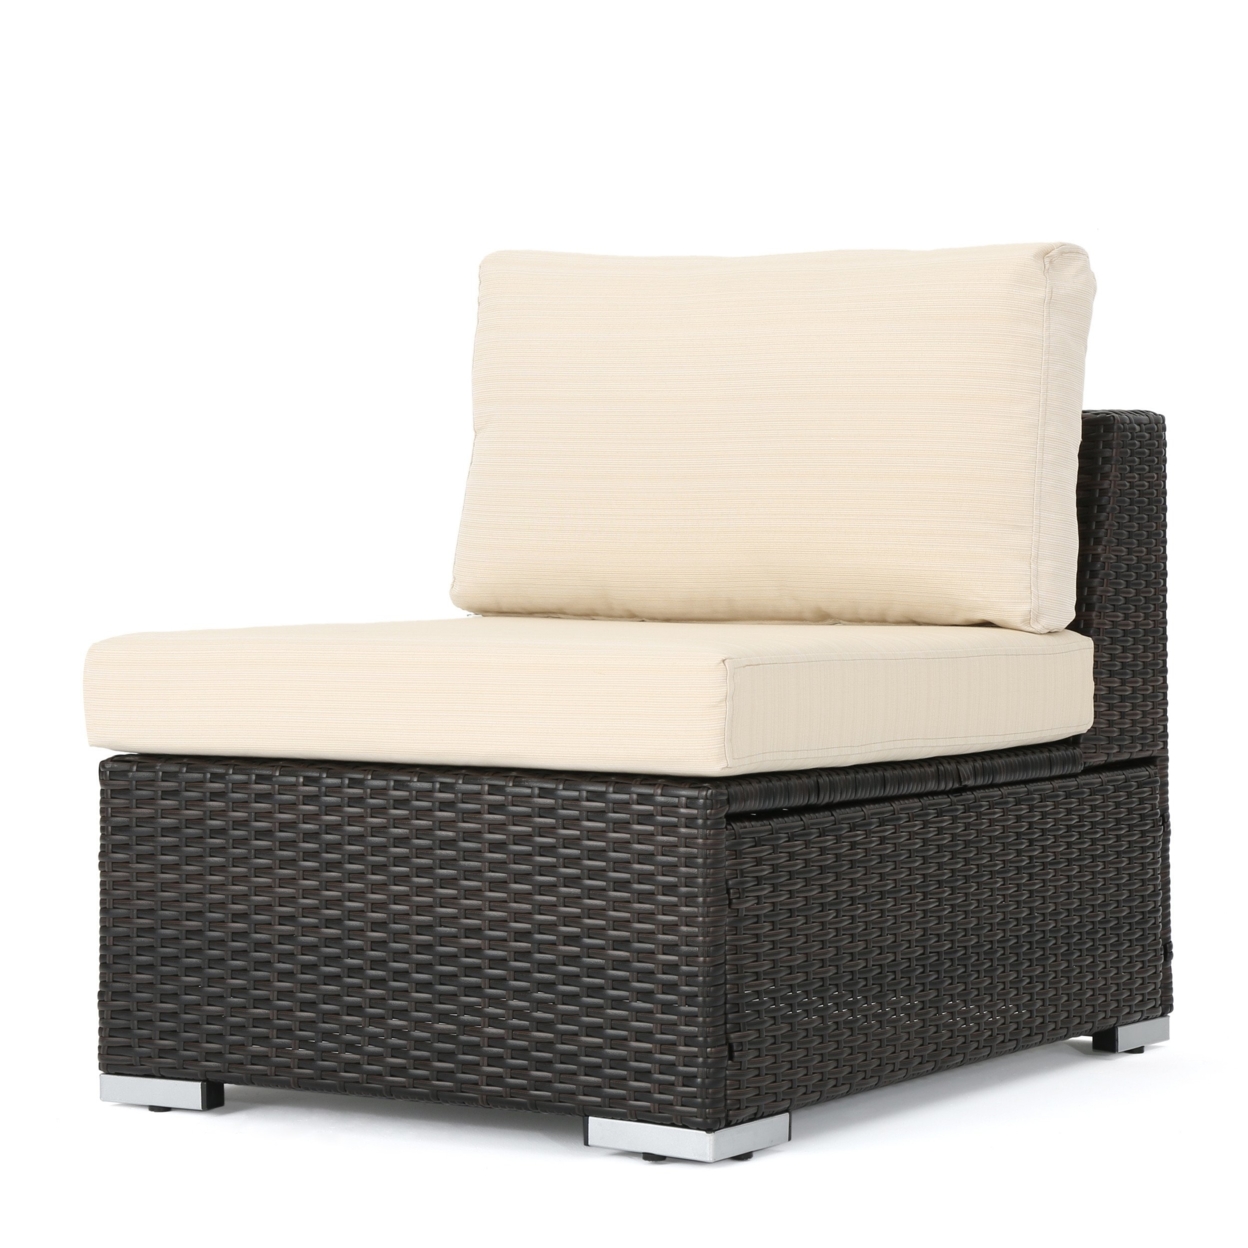 Francisco Outdoor Wicker Sectional Sofa Seat With Cushions - Multibrown/Beige